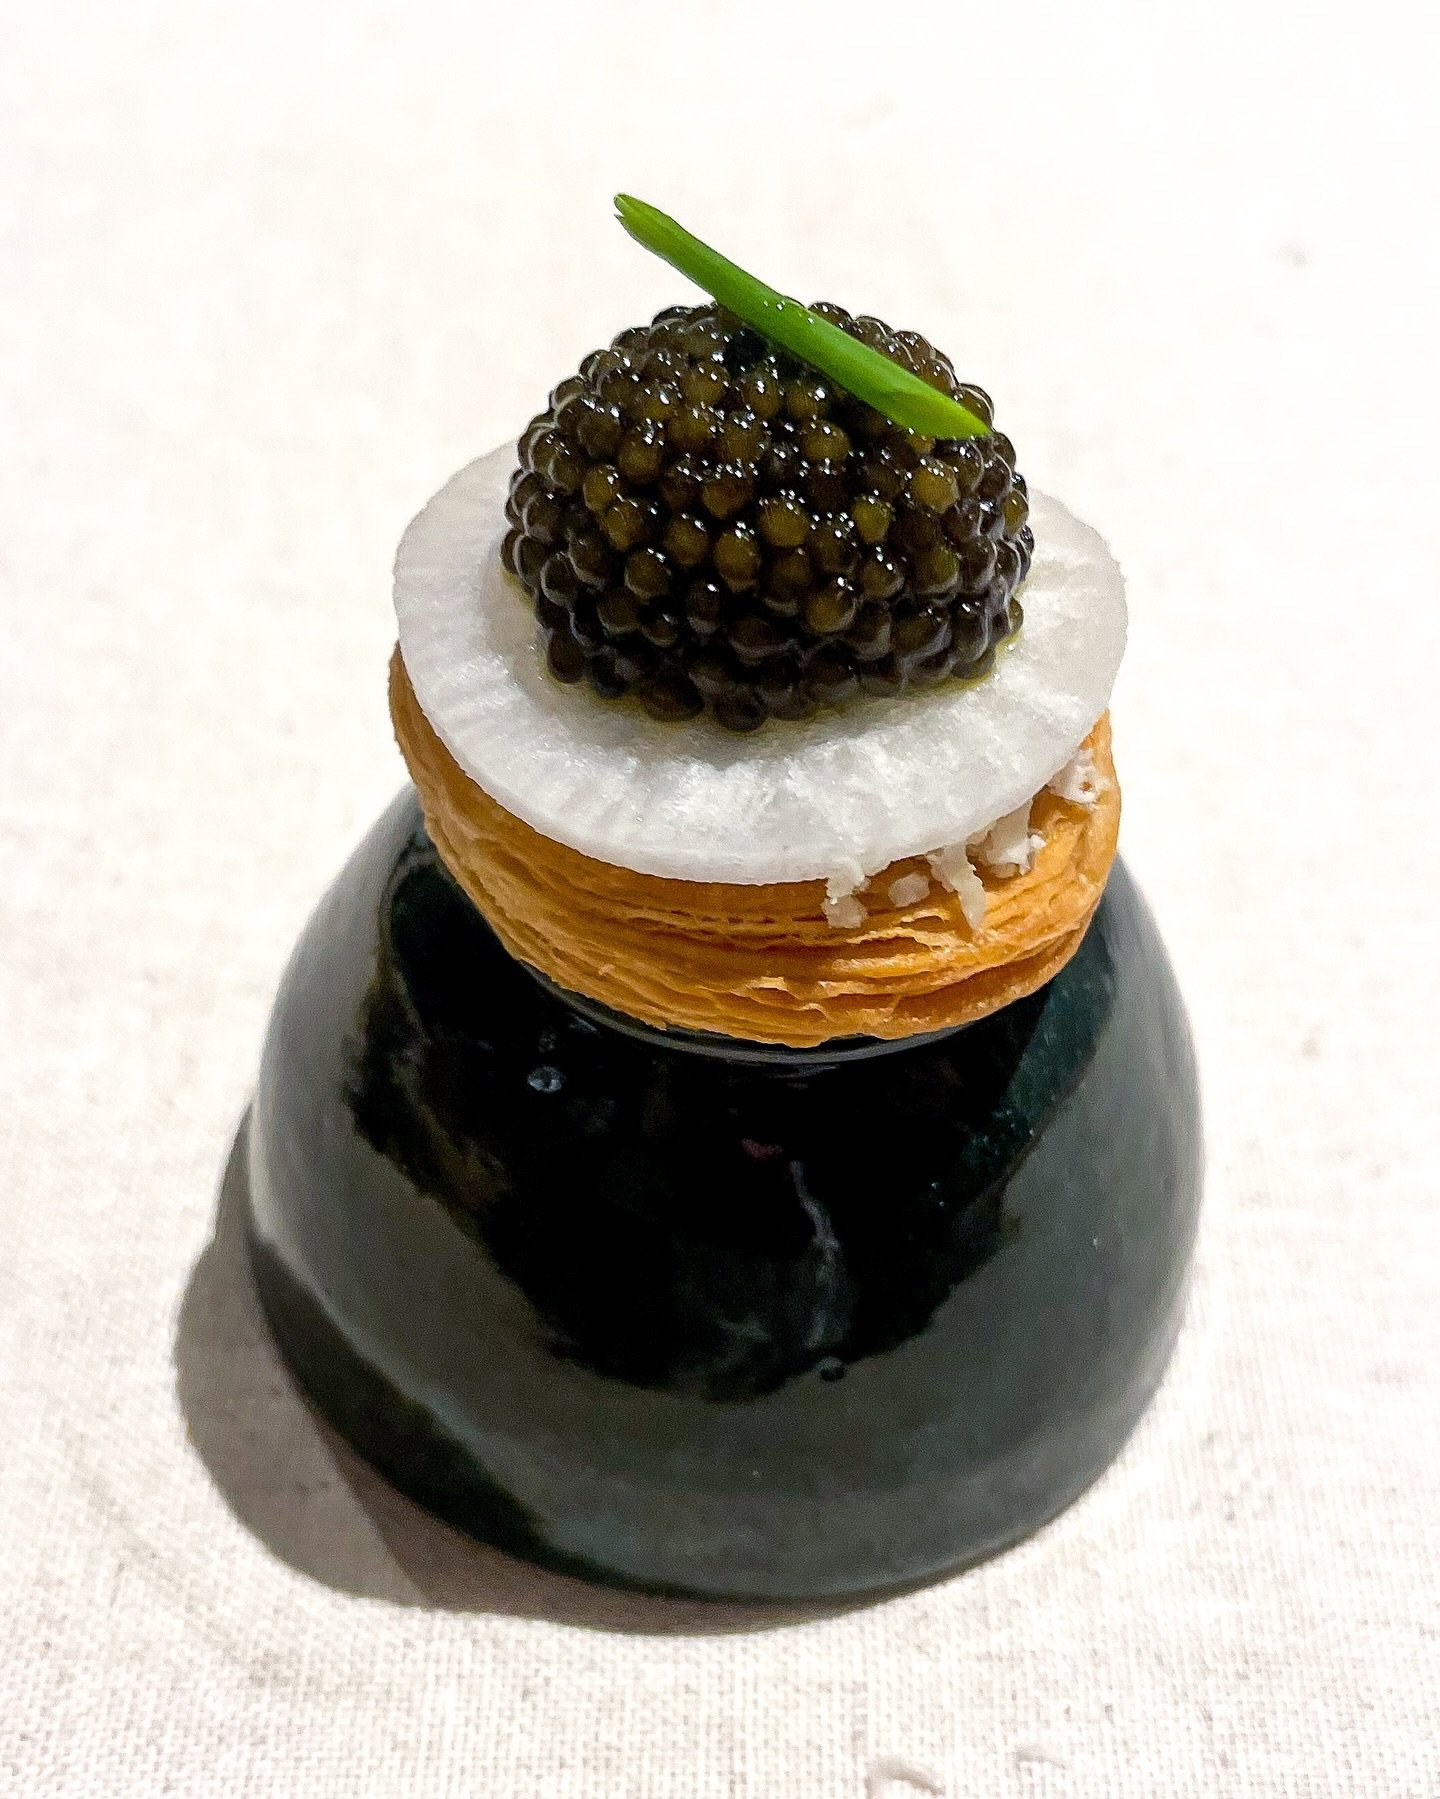 A taste of @menas50best No.1 - The Best Restaurant in Middle East and North Africa @orfalibros_bistro. Chef @m.orfali served up a Middle Eastern take on a classic caviar service, the indulgent pearls here presented along with baklava and smetana. @ca